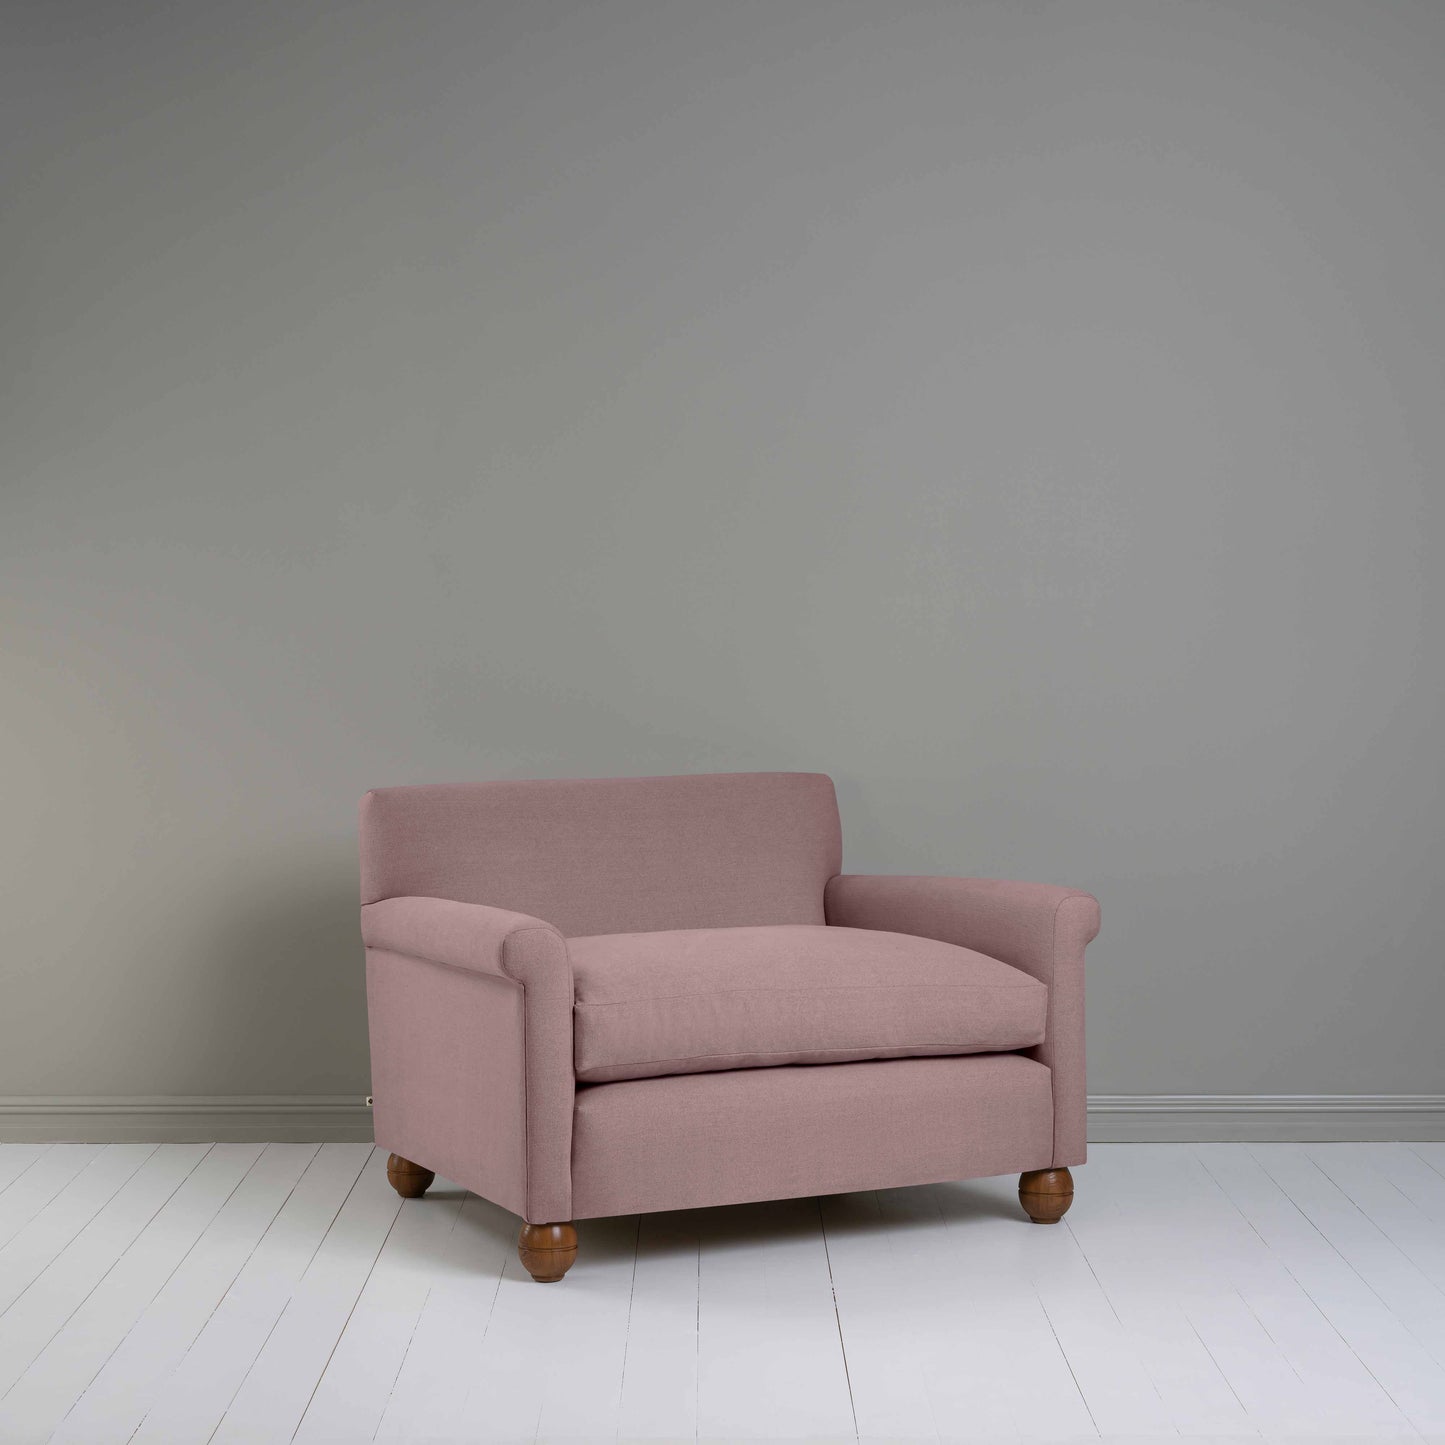 Idler Love Seat in Laidback Linen Heather